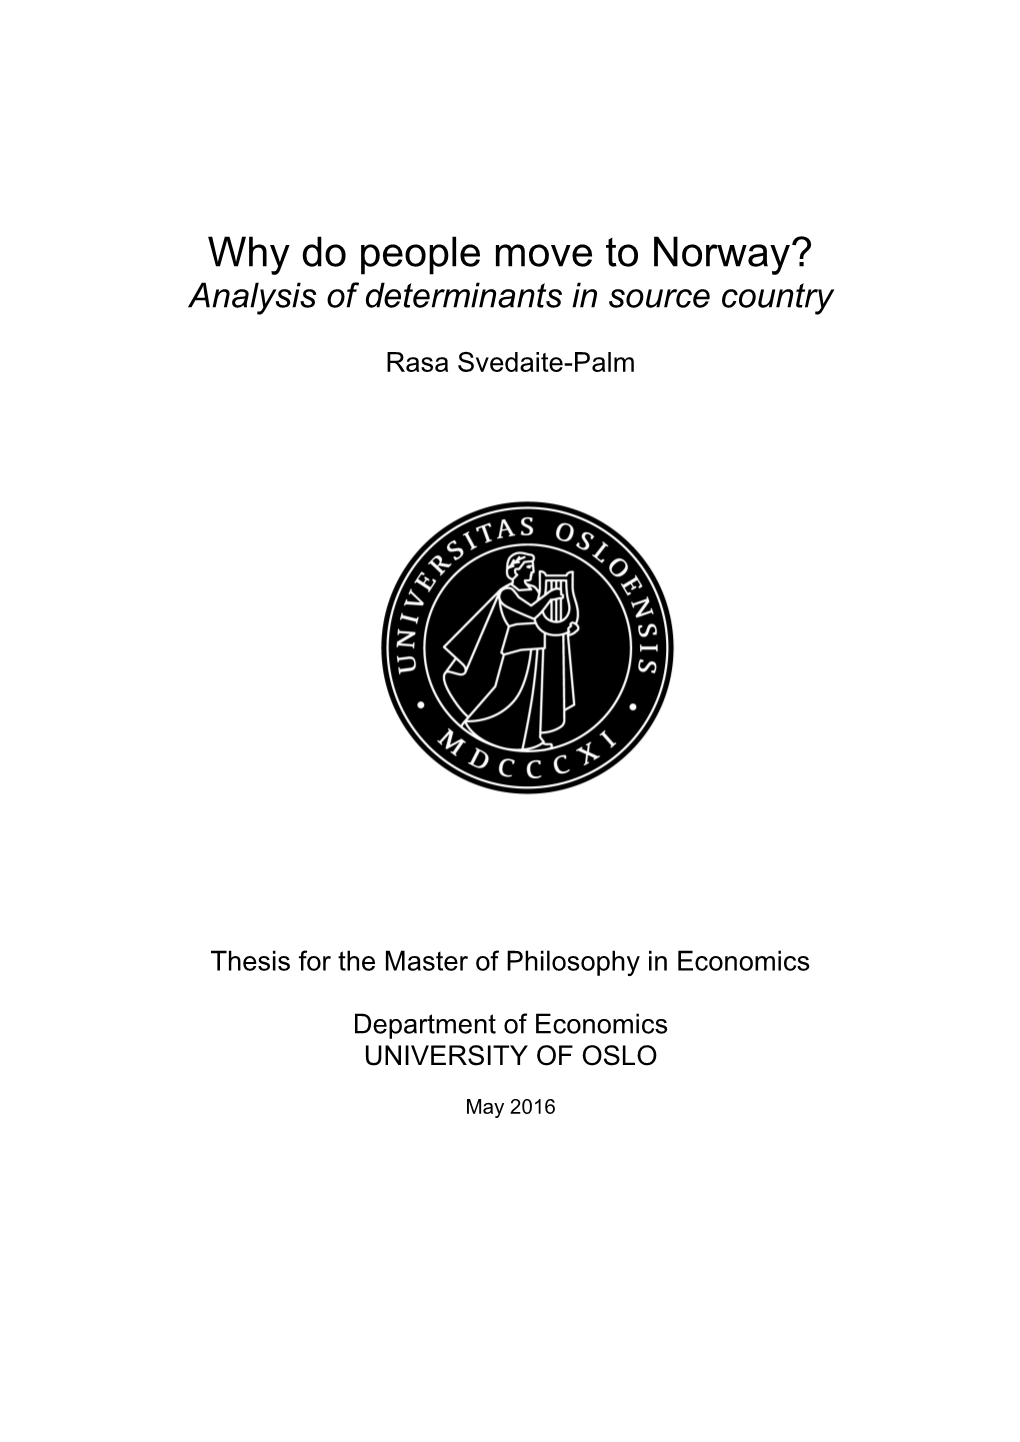 Why Do People Move to Norway? Analysis of Determinants in Source Country